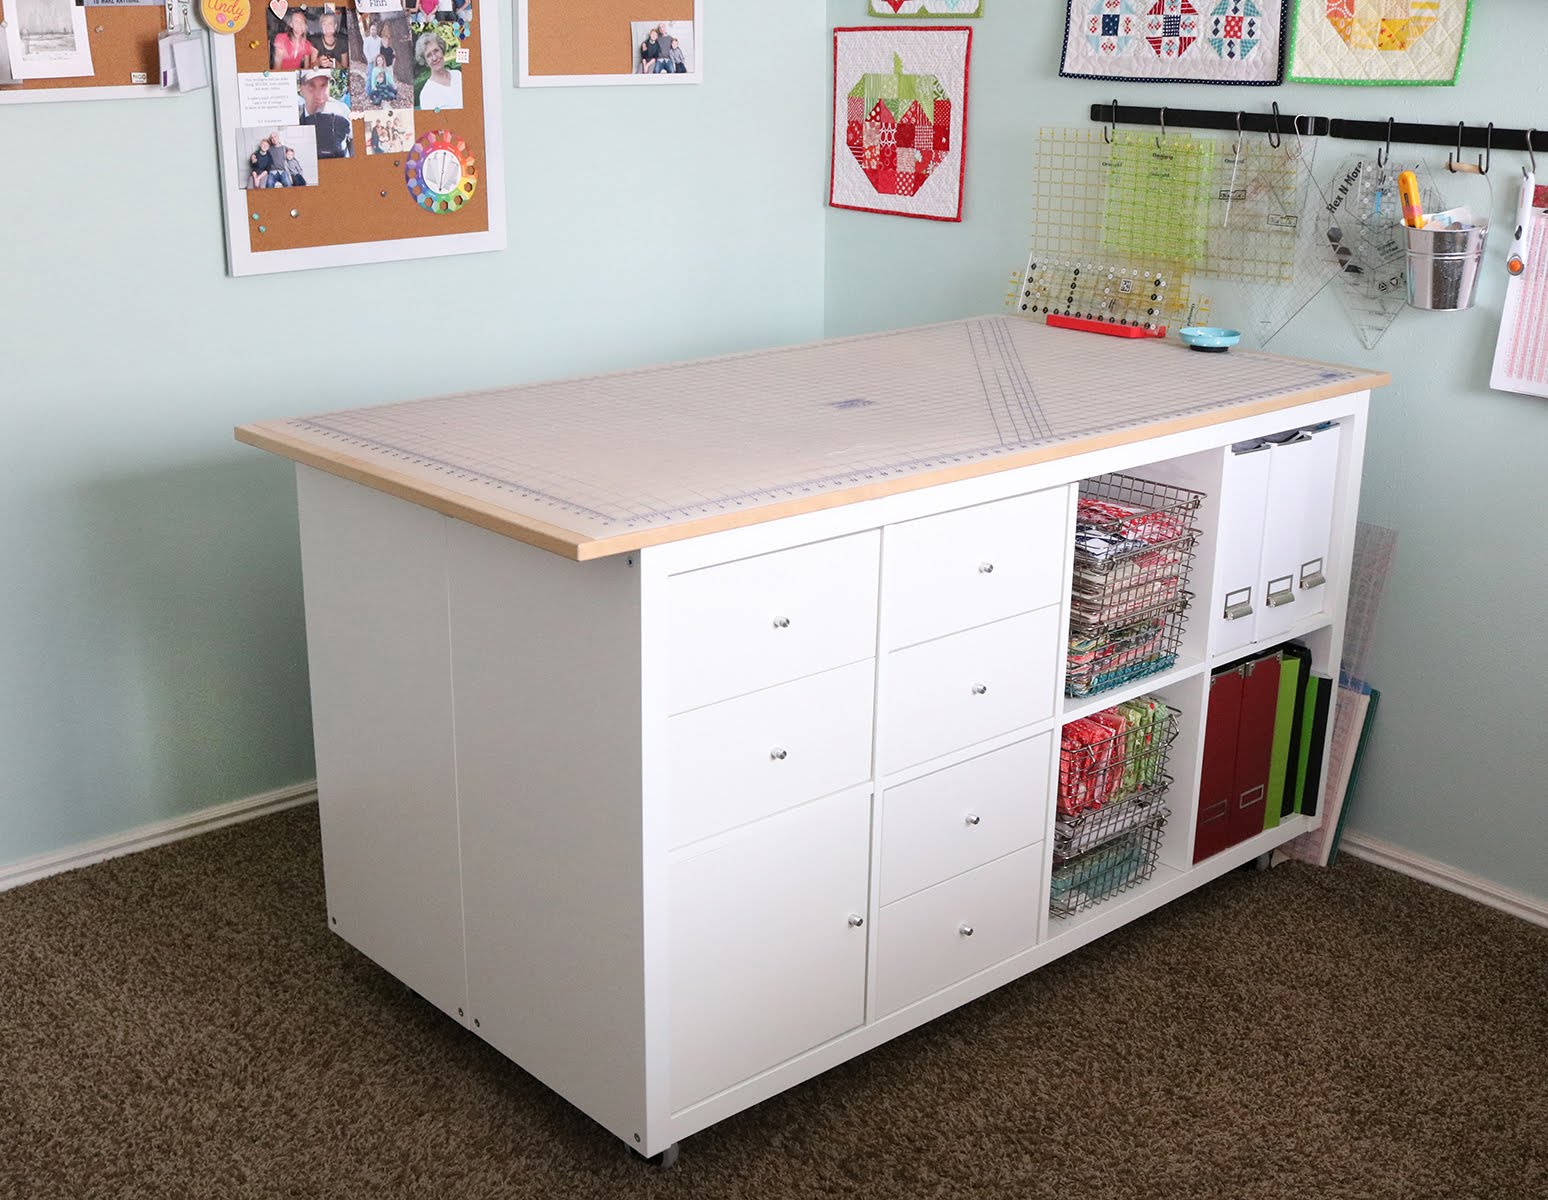 A Bright Corner Diy Sewing Room Cutting Table Ikea Hack